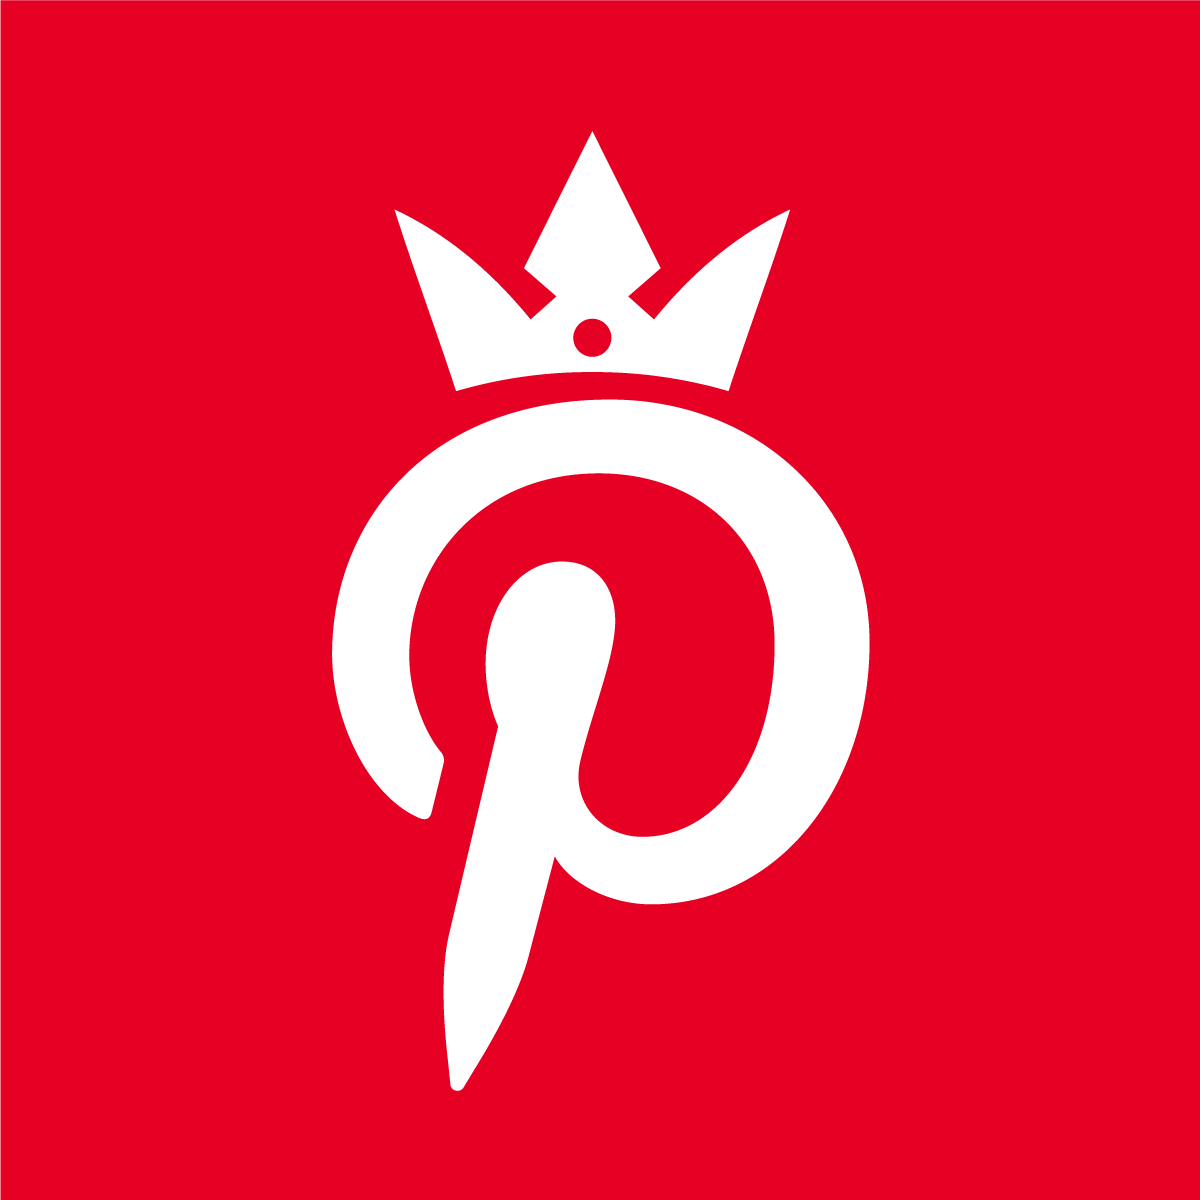 Hire Shopify Experts to integrate Pinterest Pixel Tag â€‘ Smart app into a Shopify store